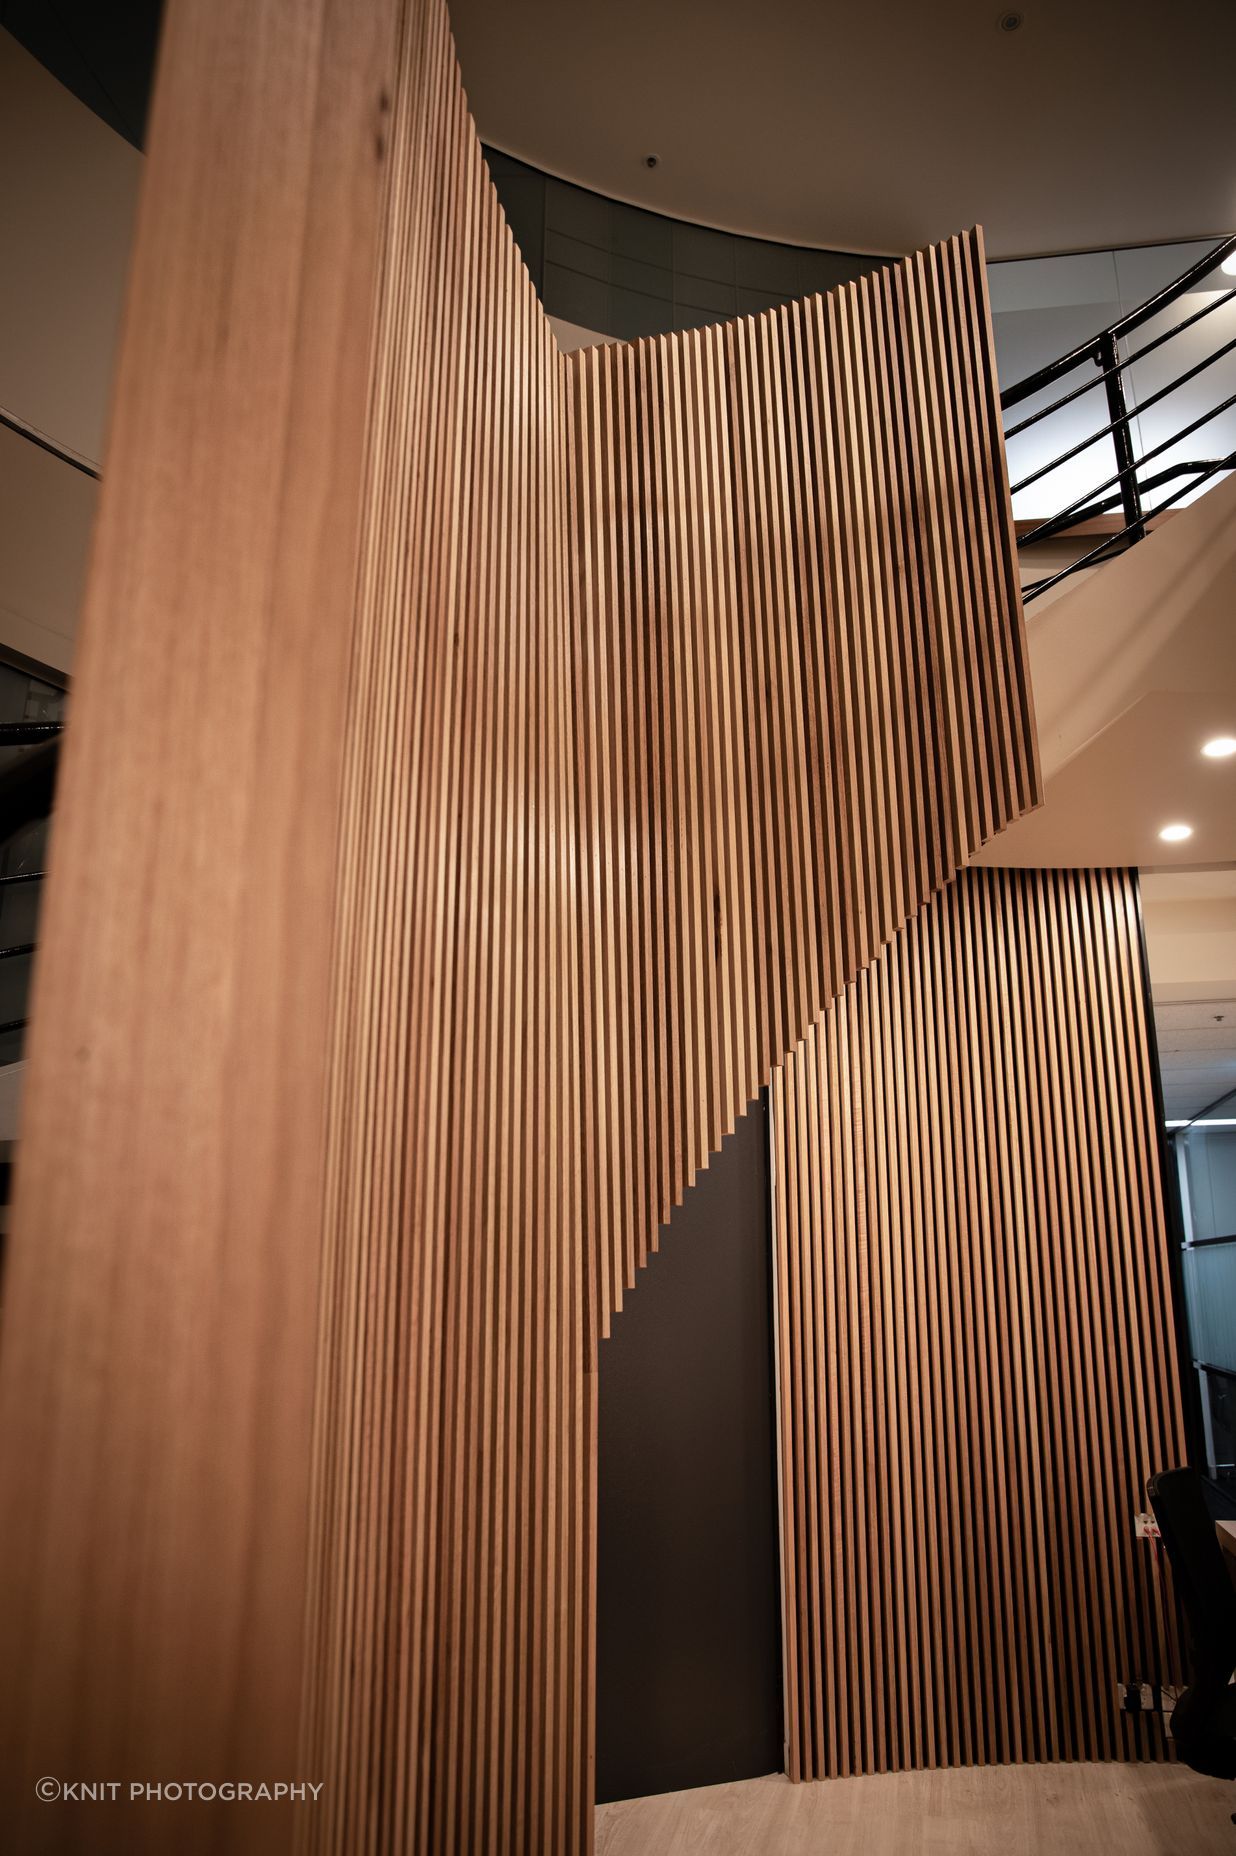 Linear Wood Feature Wall